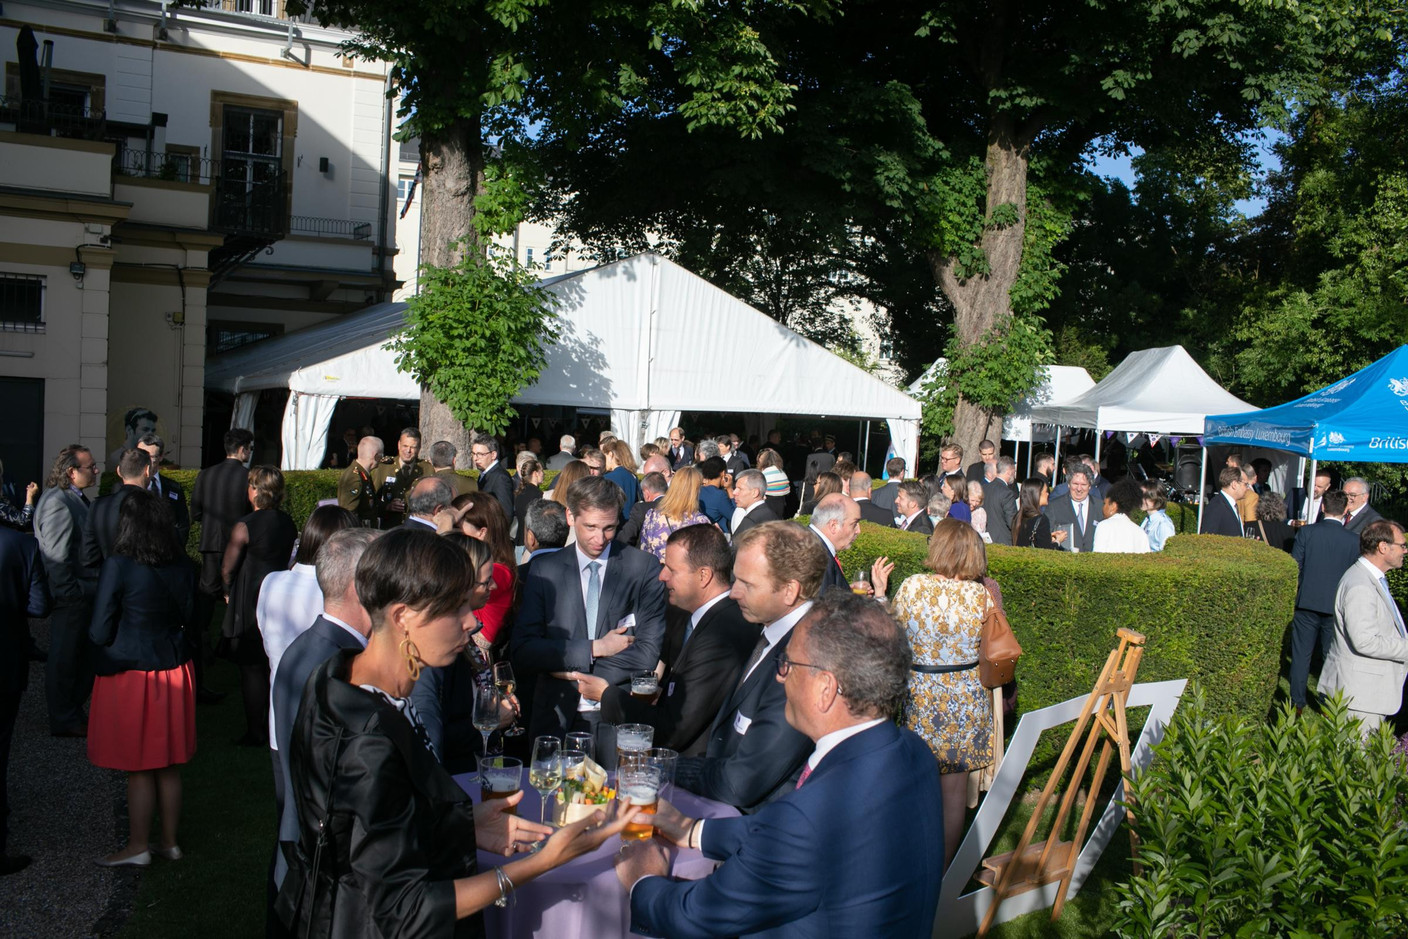  The celebration took place in the magnificent setting of the British embassy residence garden Matic Zorman/Maison Moderne